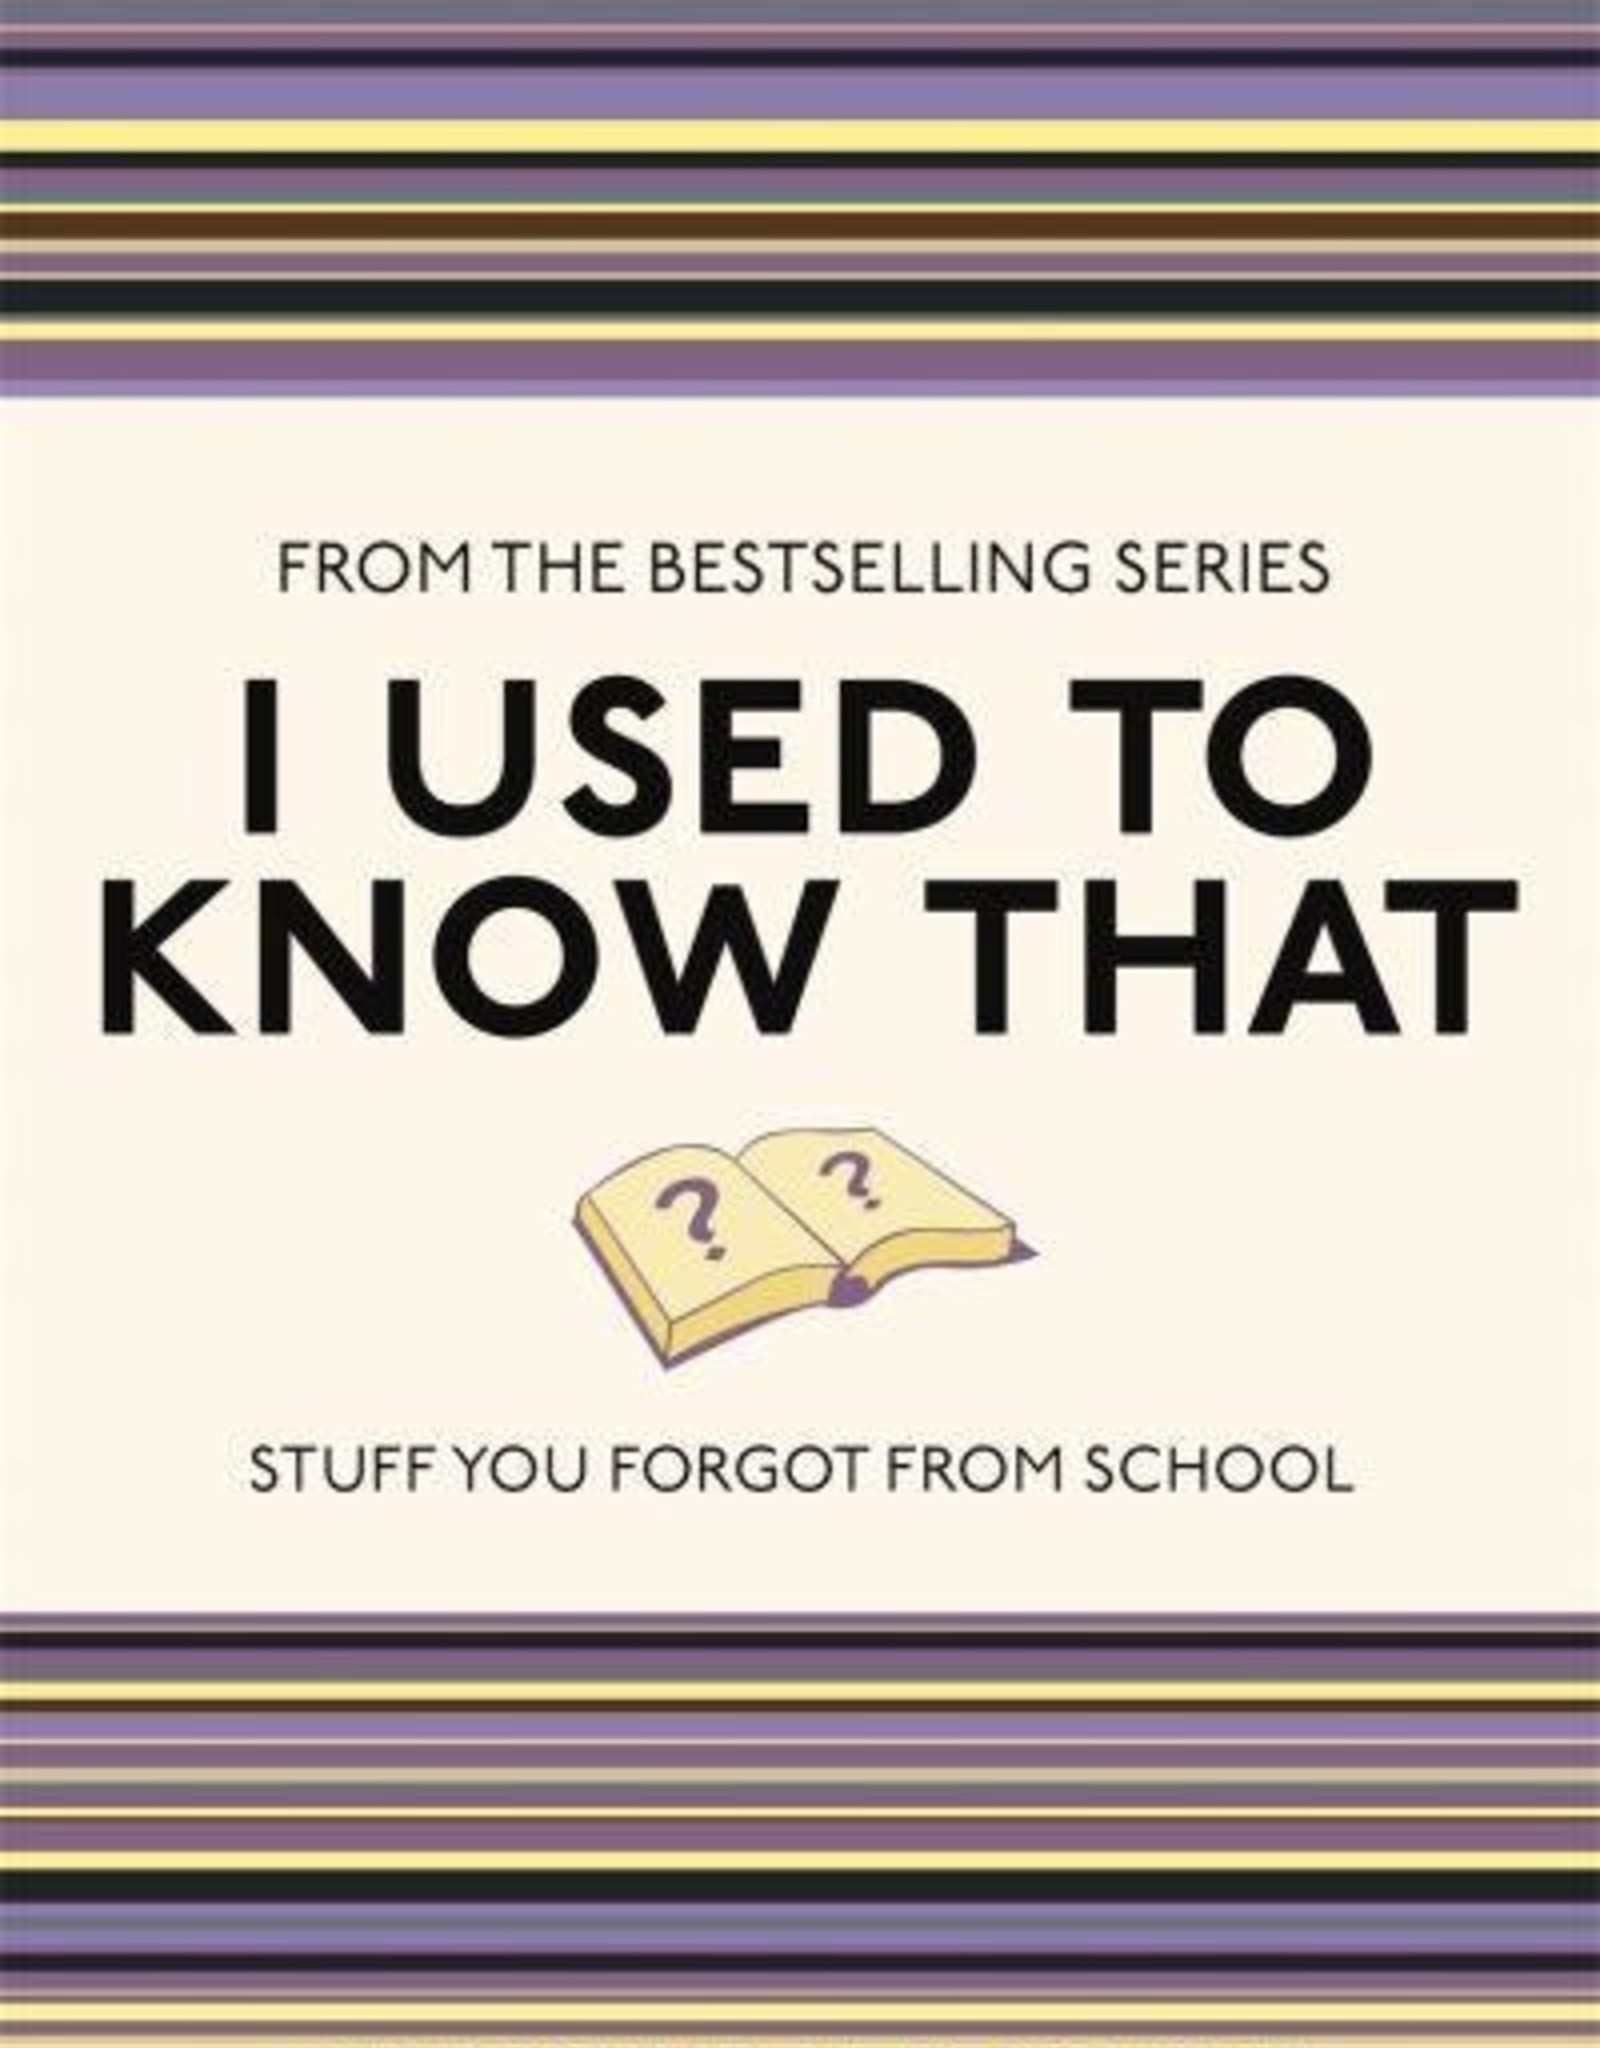 I USED TO KNOW THAT: STUFF YOU FORGOT FROM SCHOOL